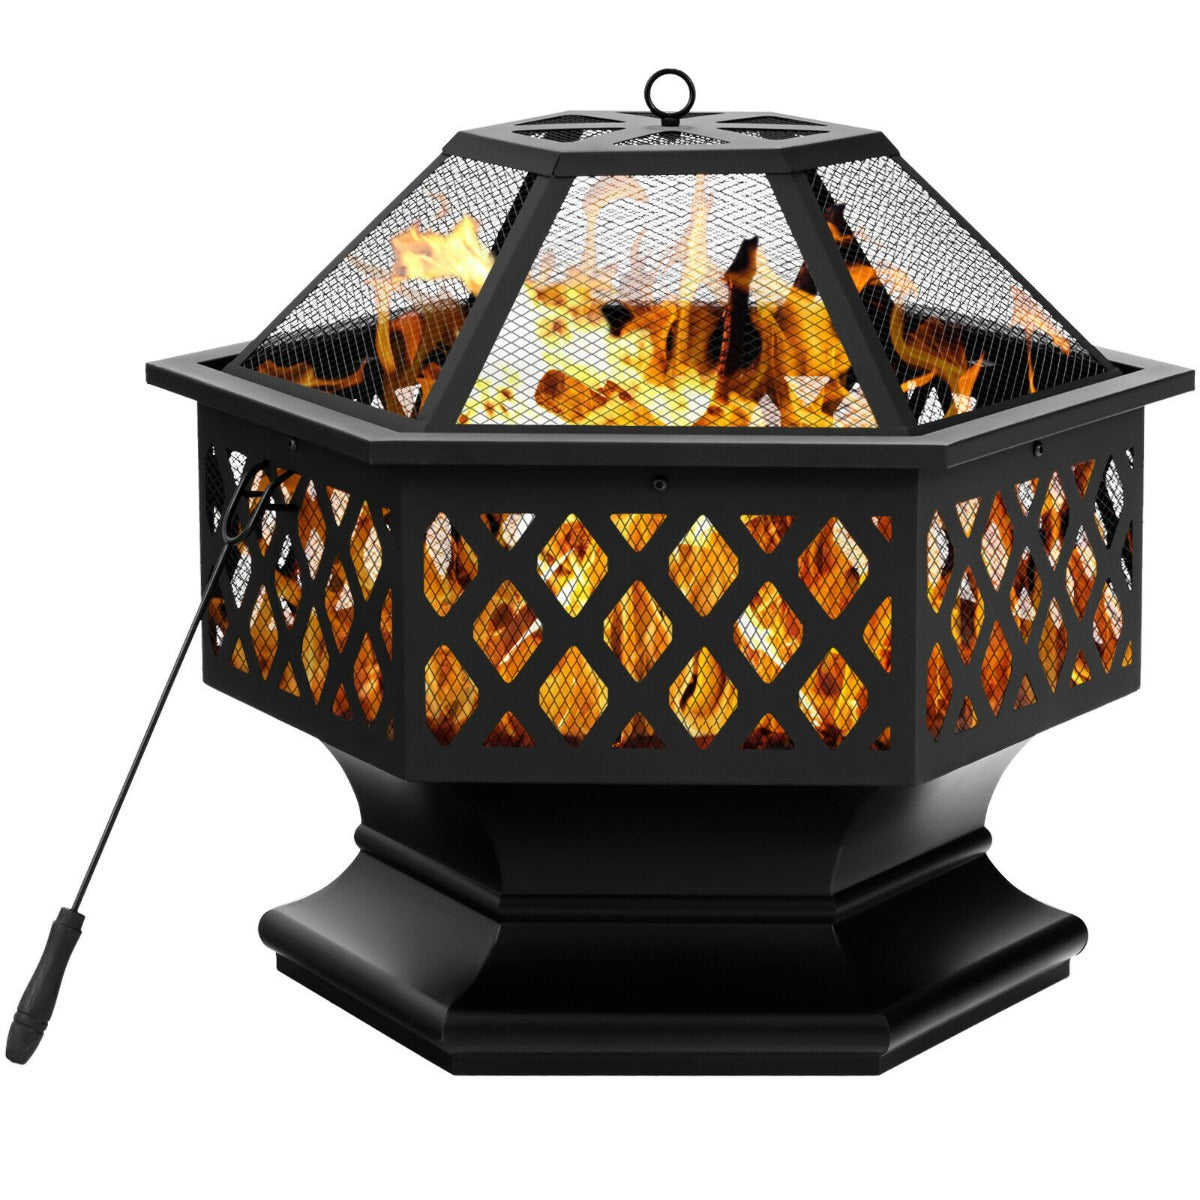 Hexagon Charcoal Metal Fire Pit with Fire Poker for Patio Black